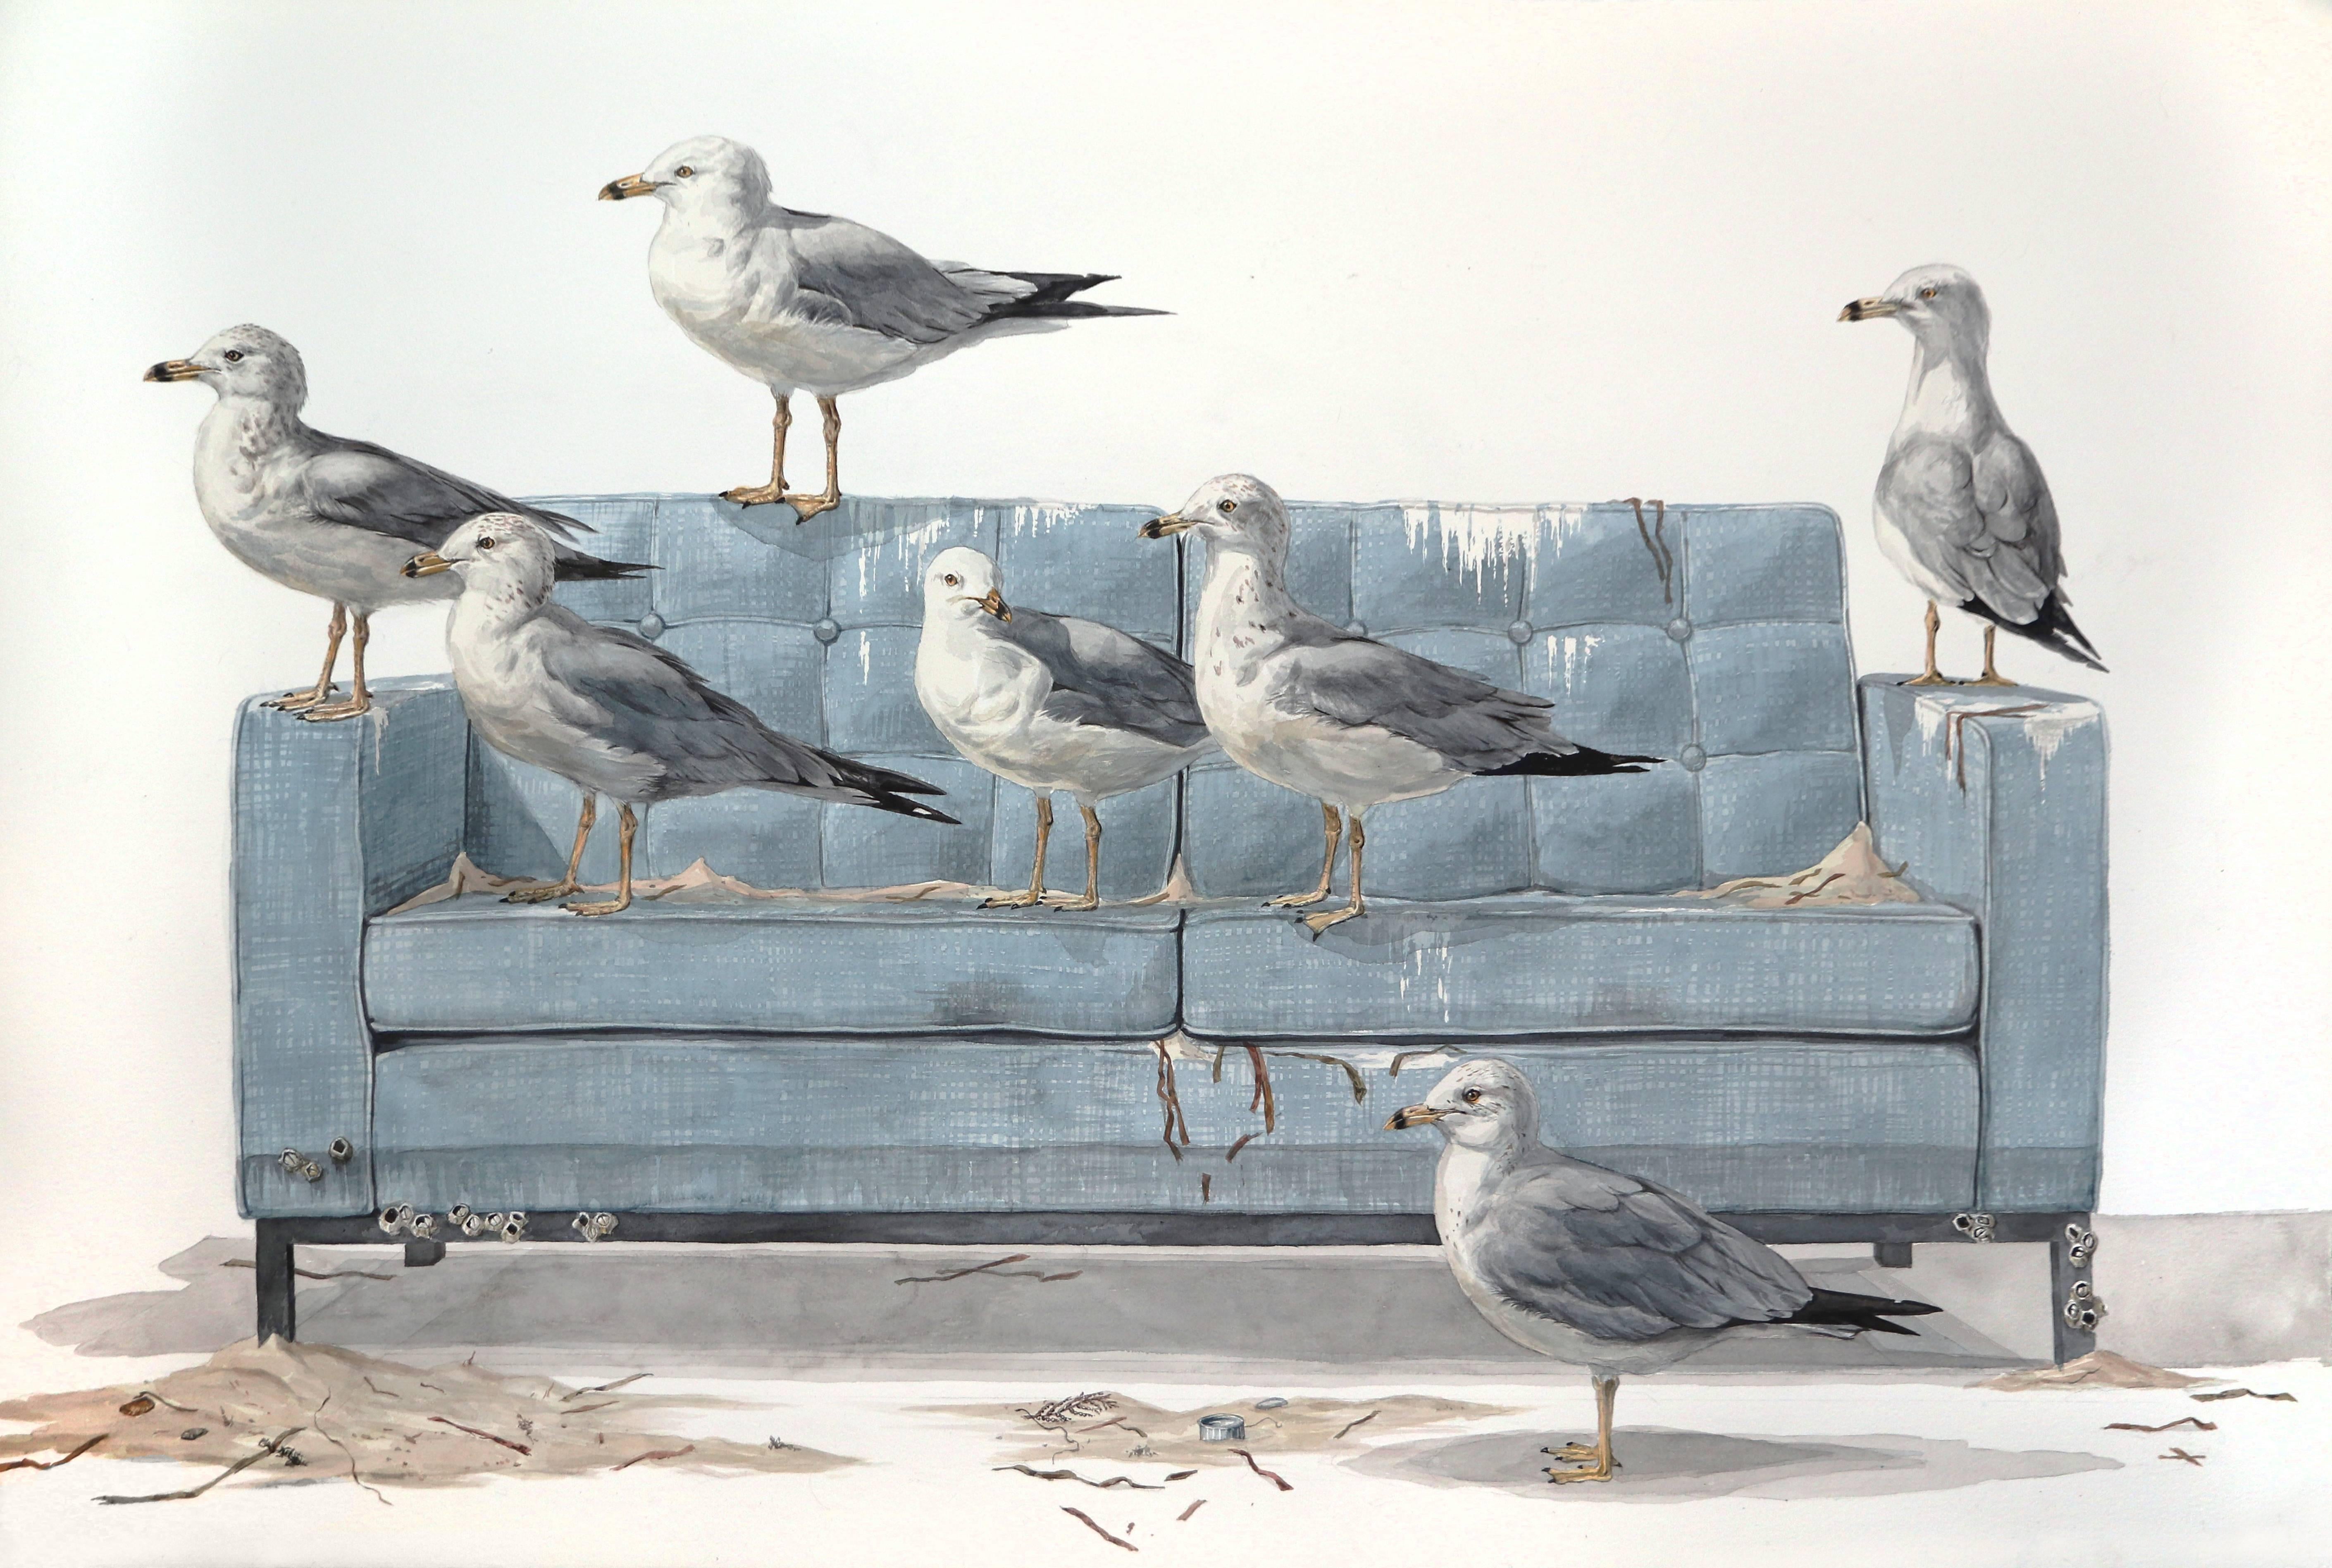 Thomas Broadbent Animal Painting - "The Flock" Large Scale Watercolor Painting, seagulls on couch